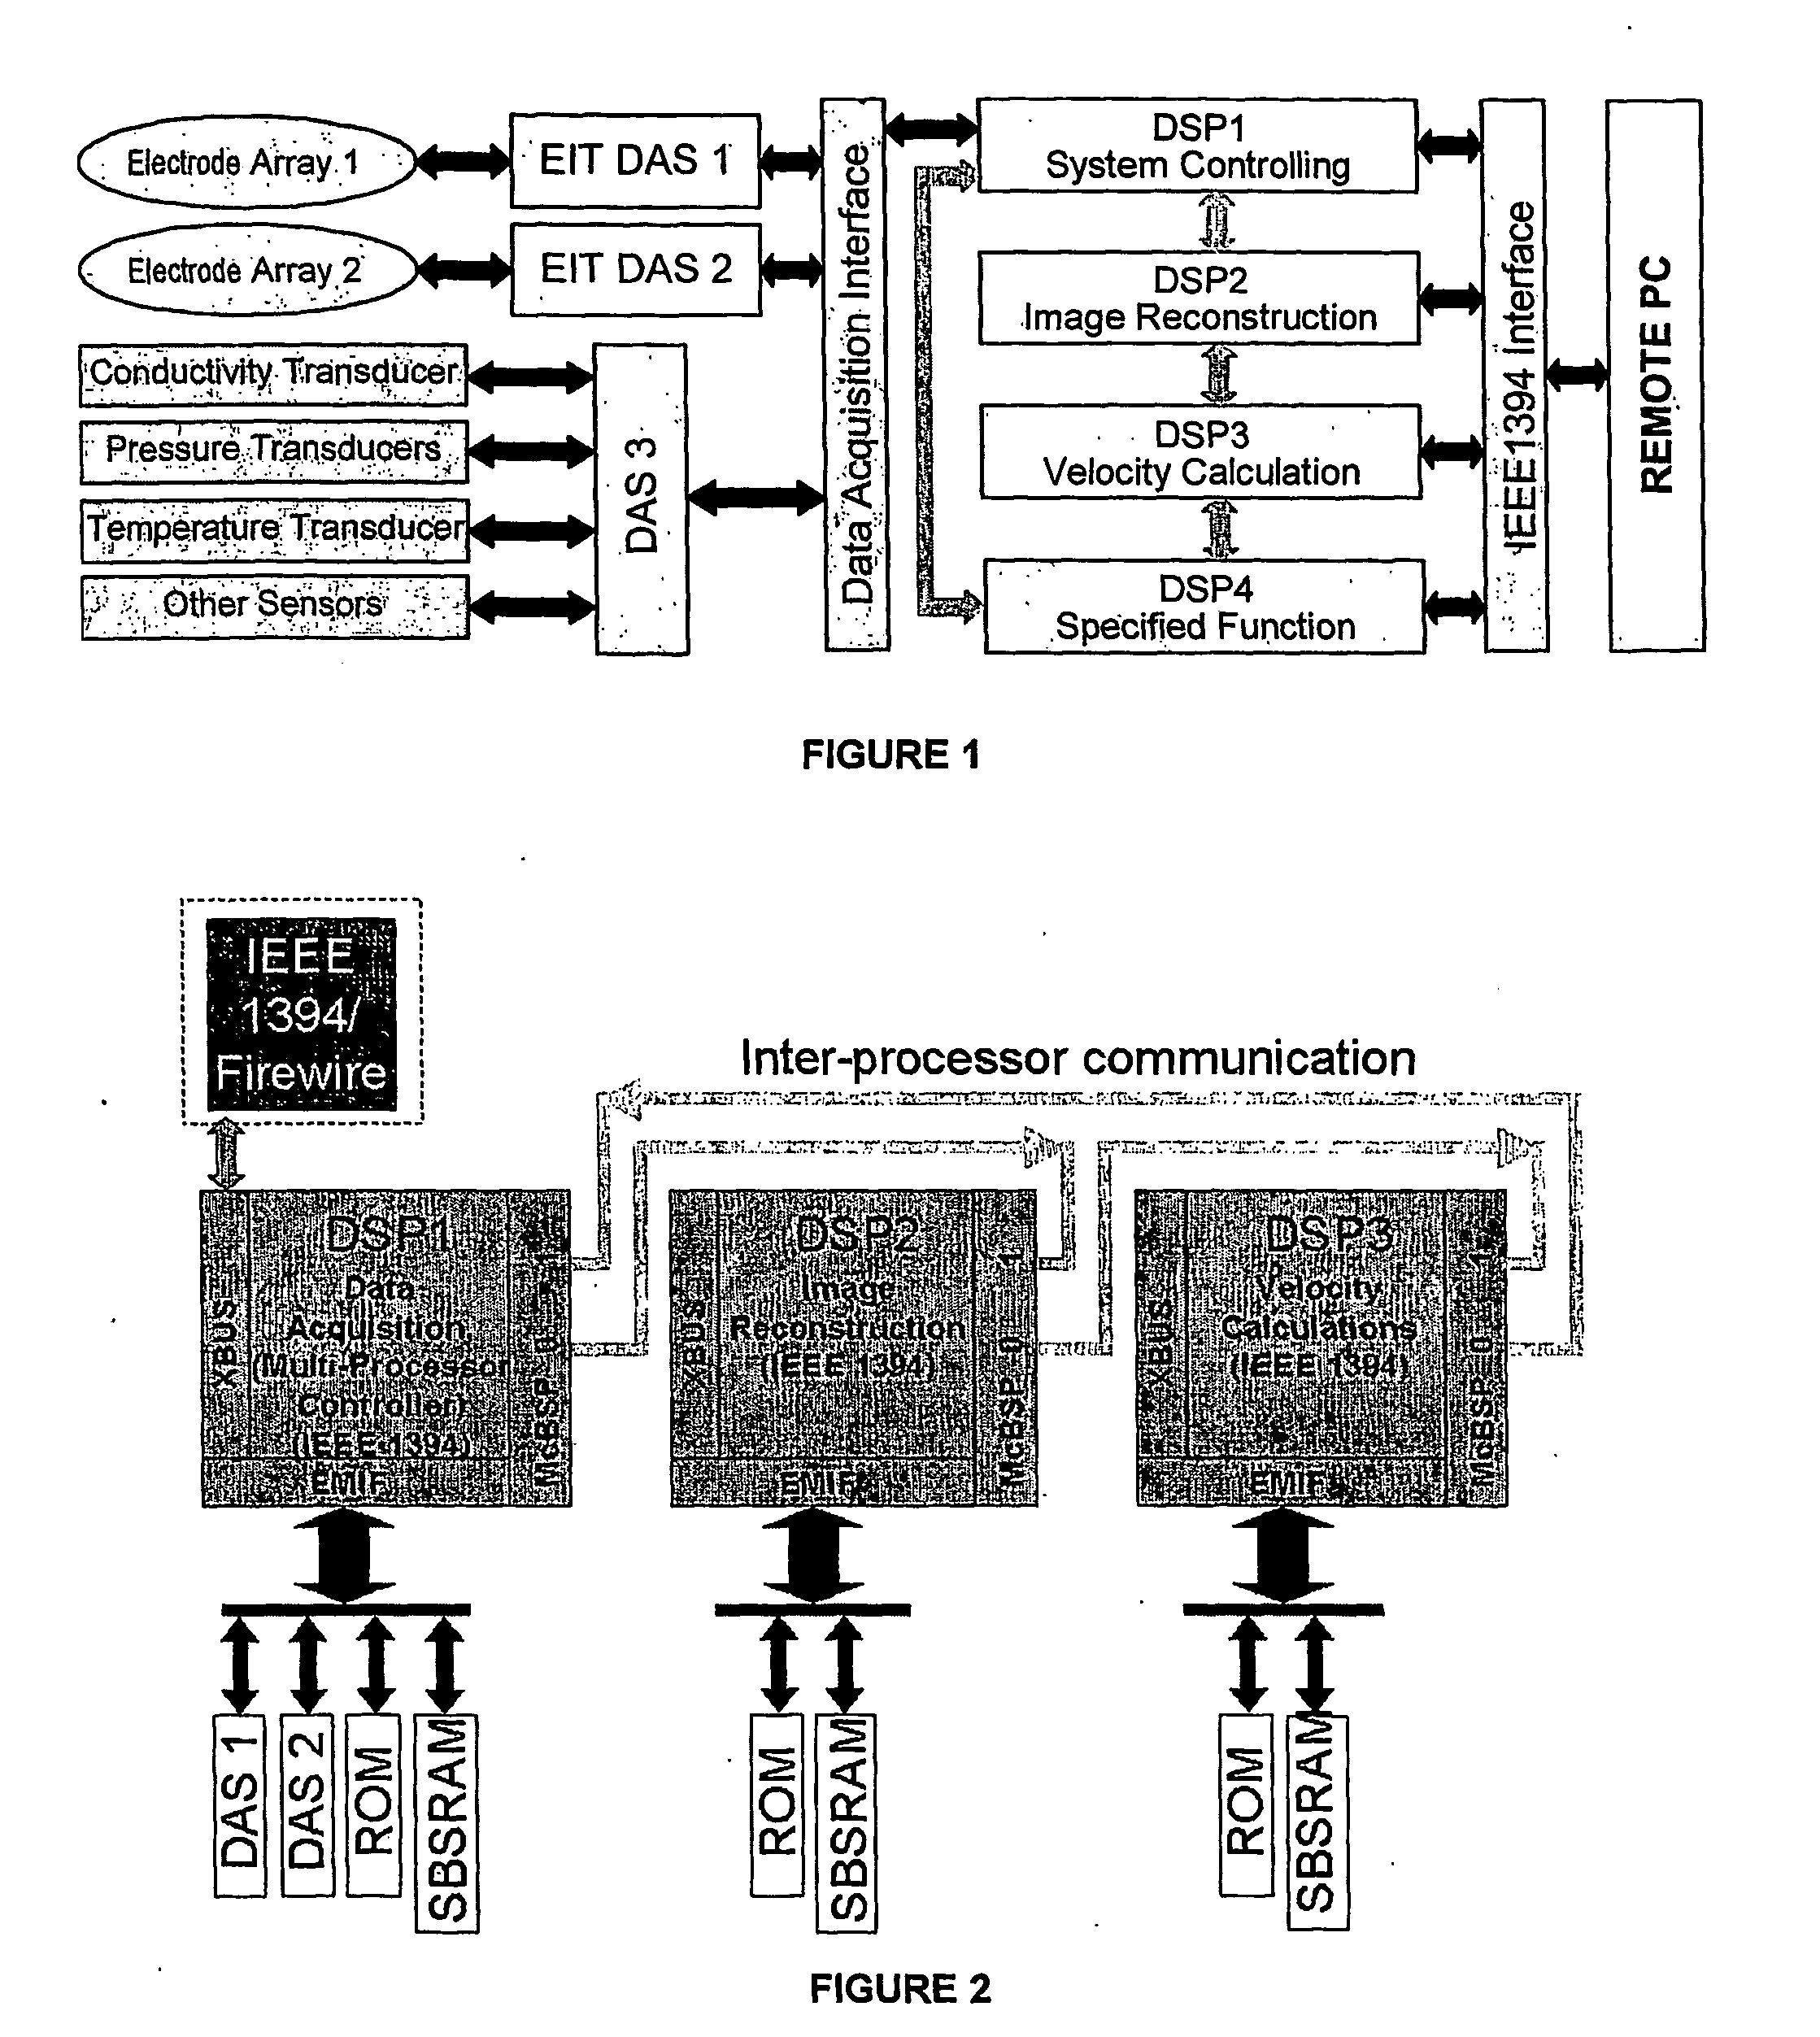 Eit data processing system and method